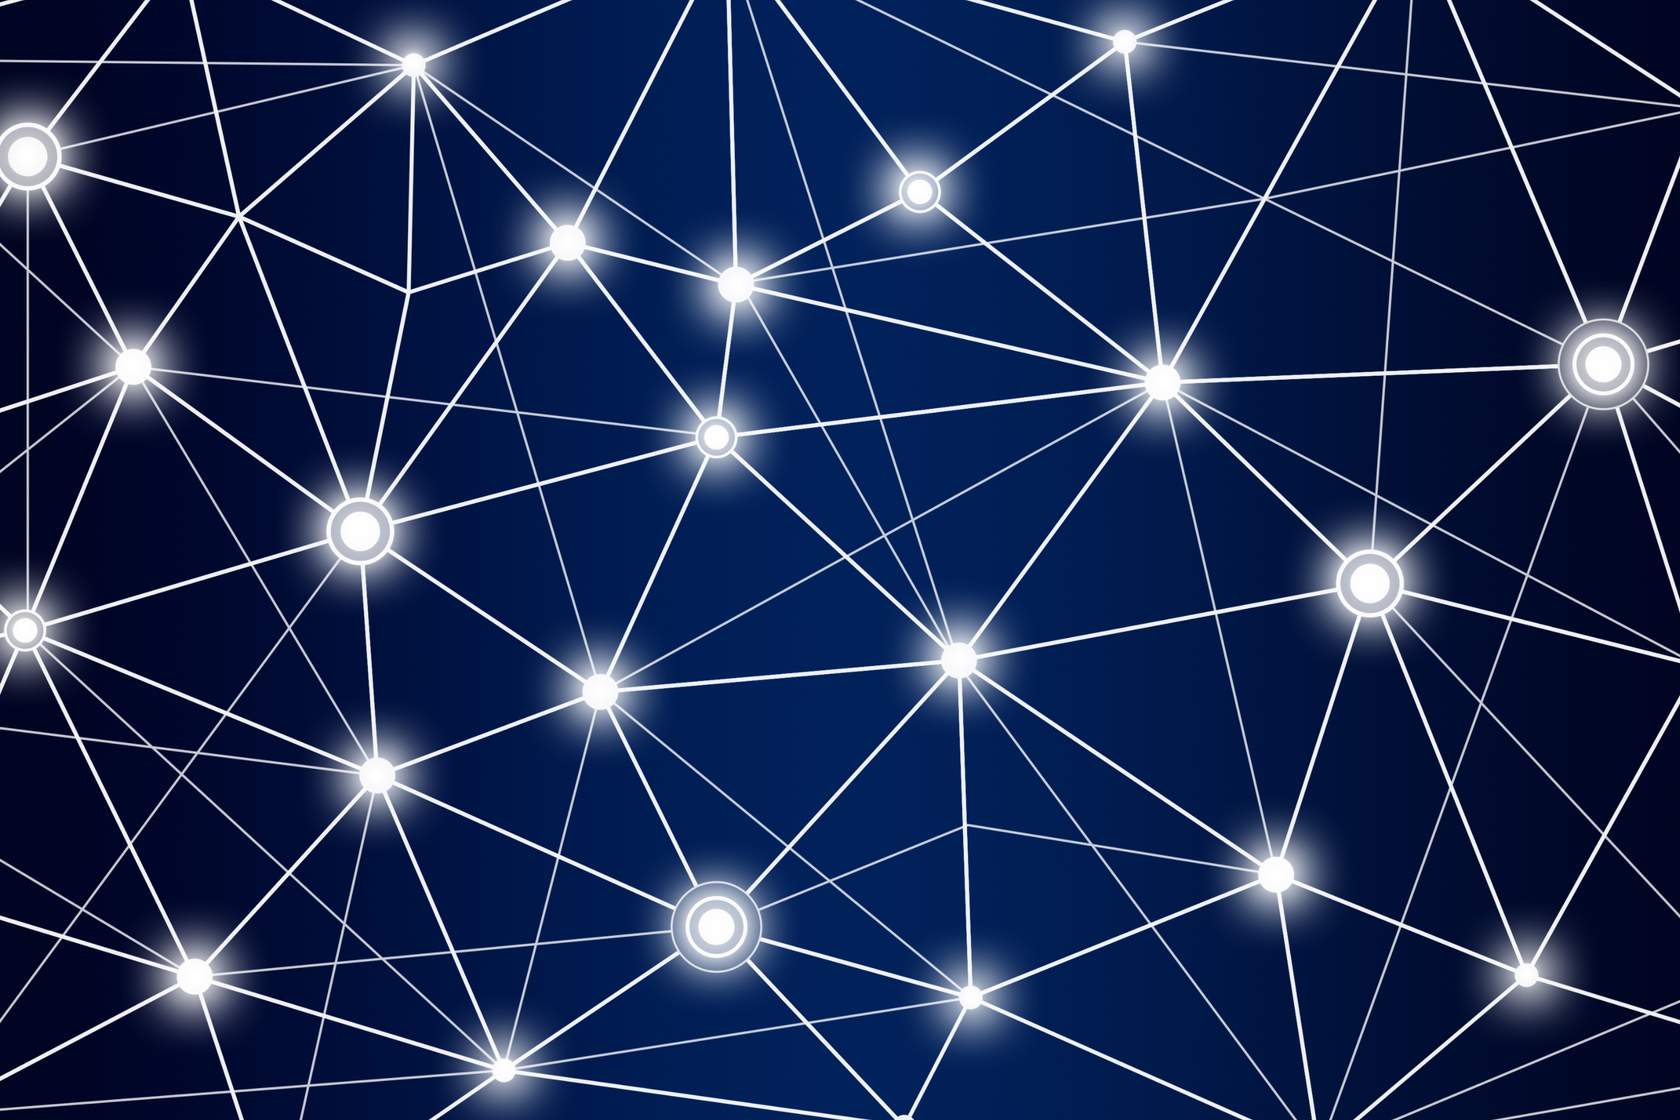 A network of dots and lines on a dark blue background featuring networks.